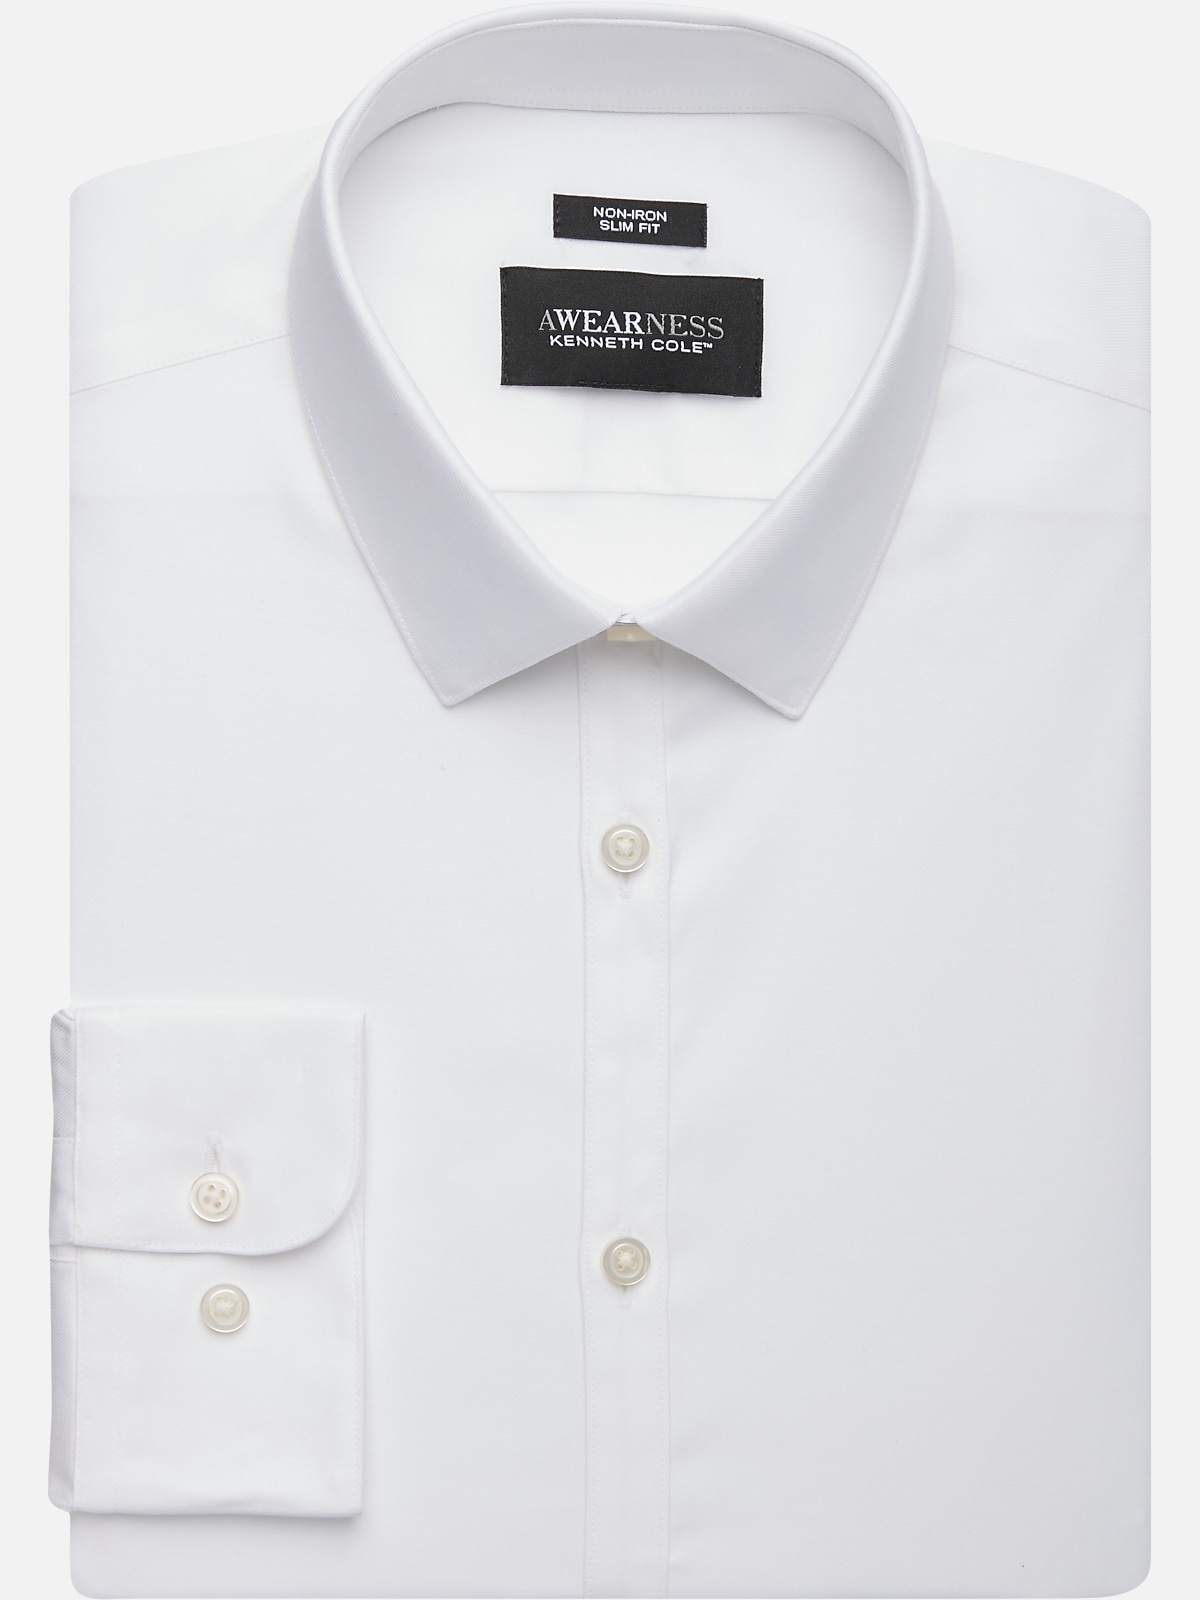 Awearness Kenneth Cole Slim Fit Performance Dress Shirt | All Clearance ...